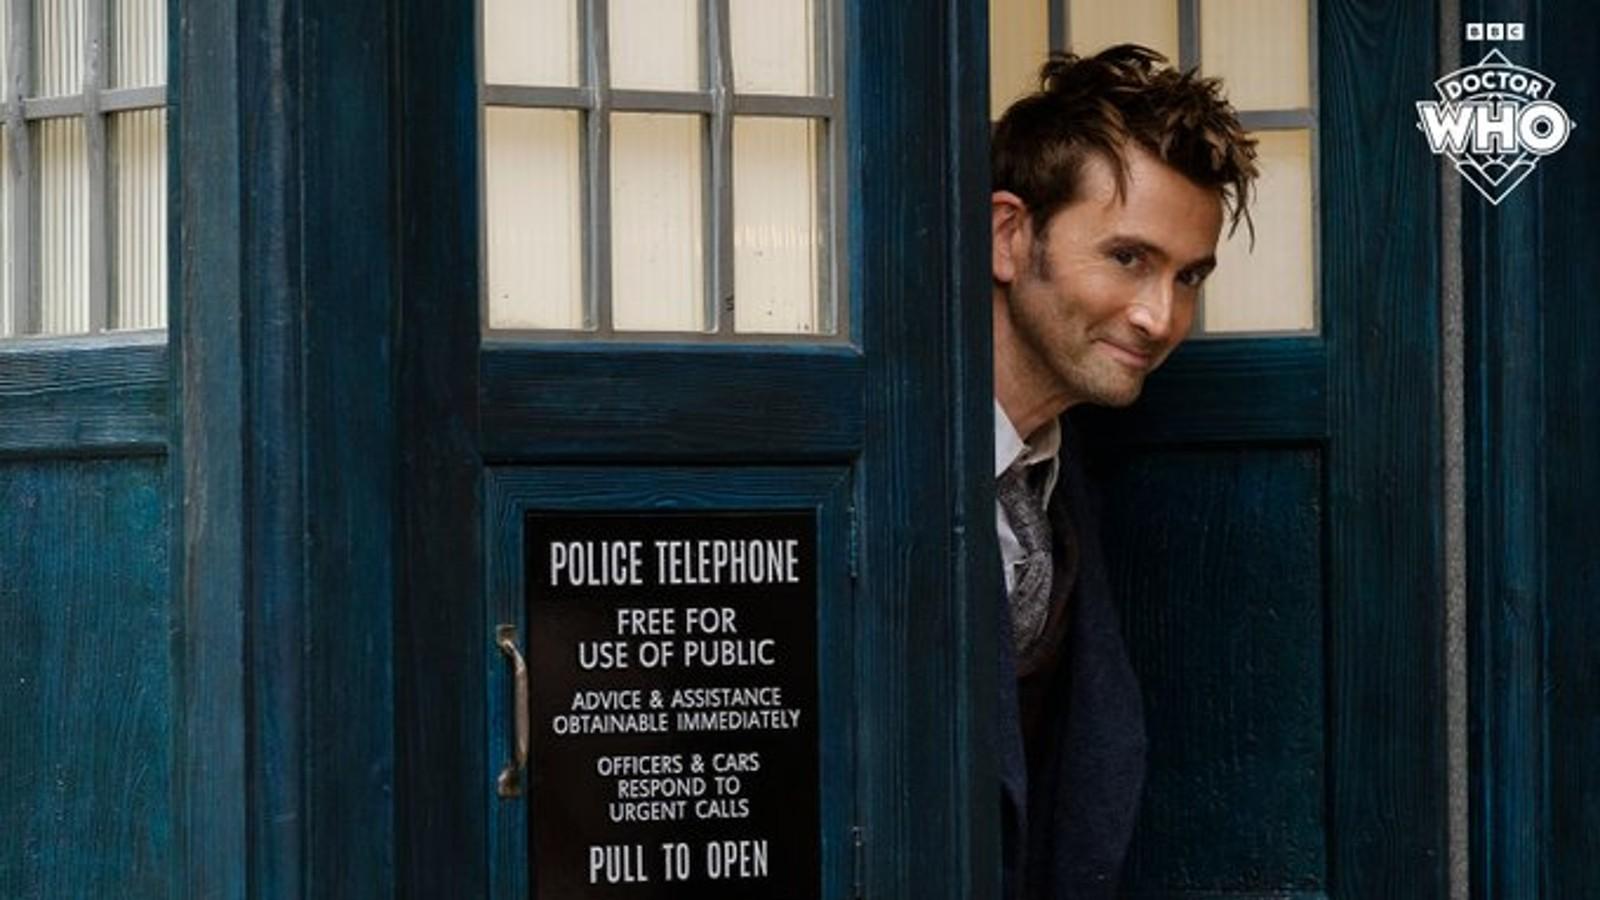 An image of David Tennant as the Fourteenth Doctor in the upcoming Doctor Who 60th anniversary specials.